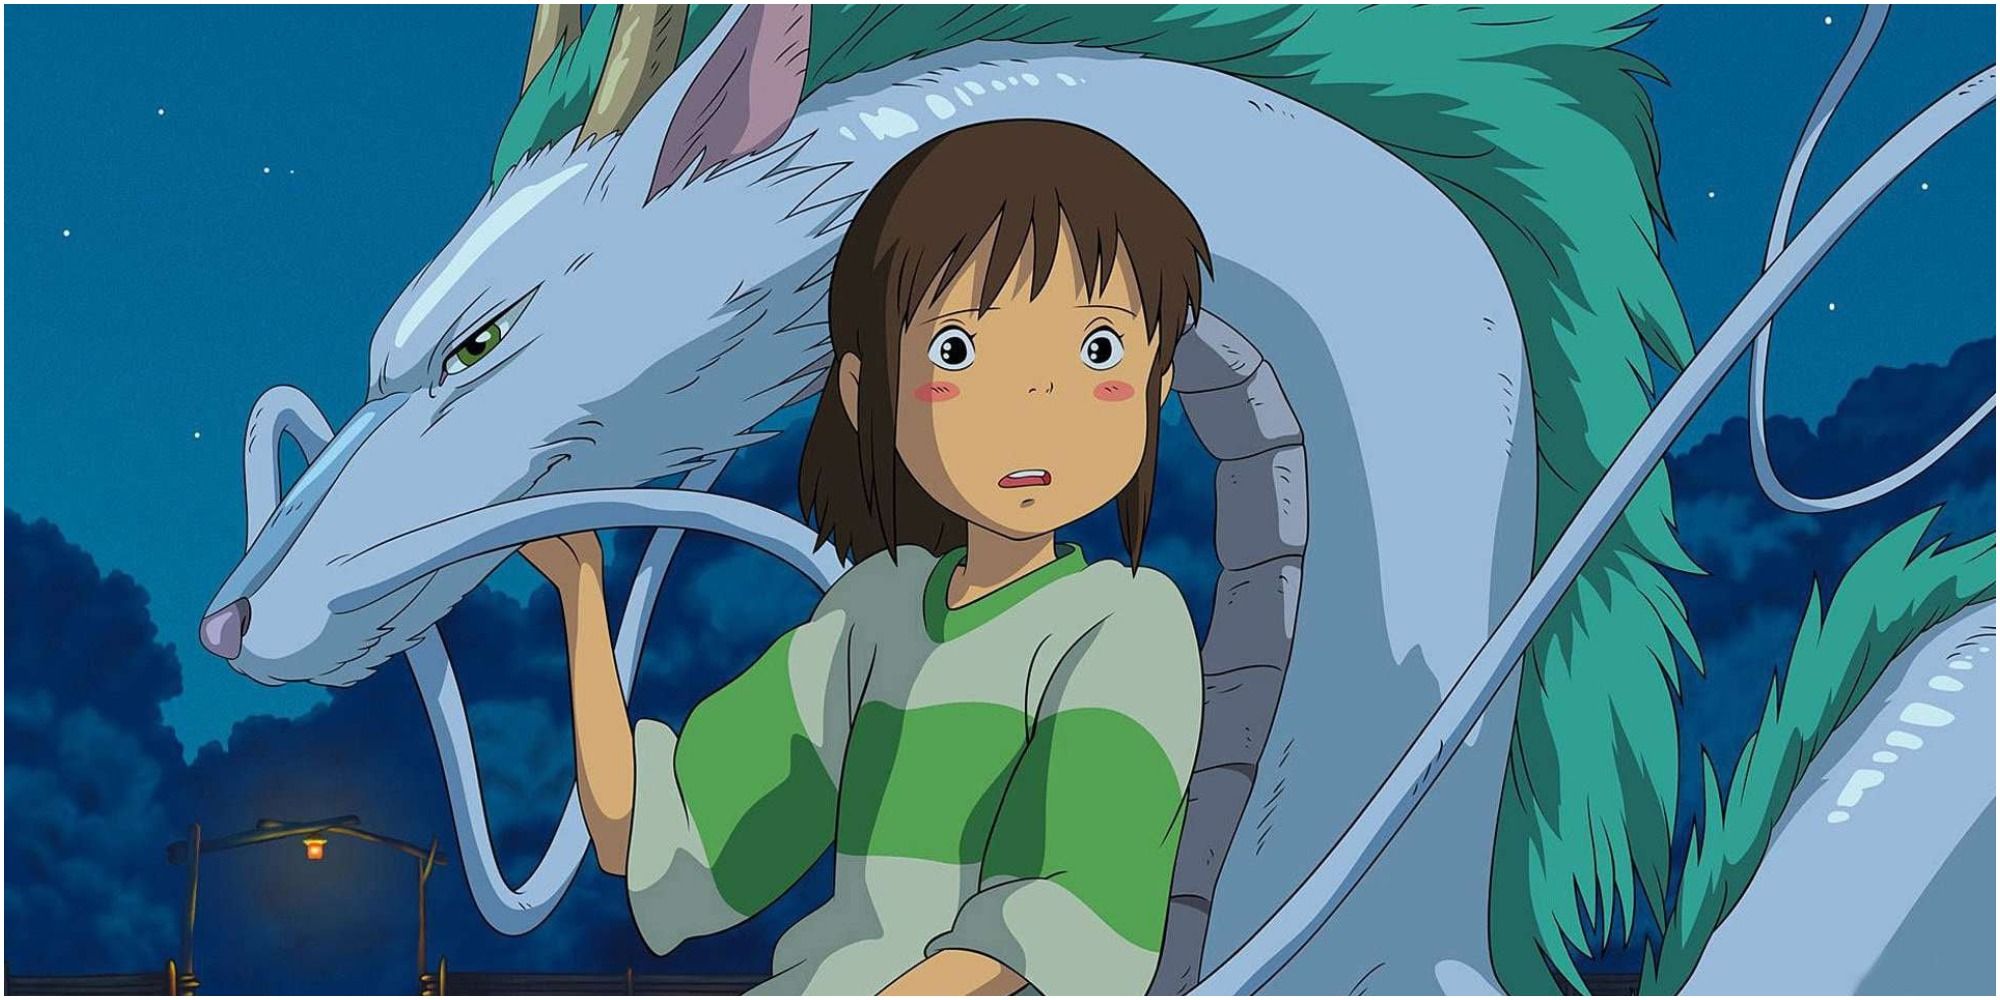 Chihiro holds onto a dragon in Spirited Away.